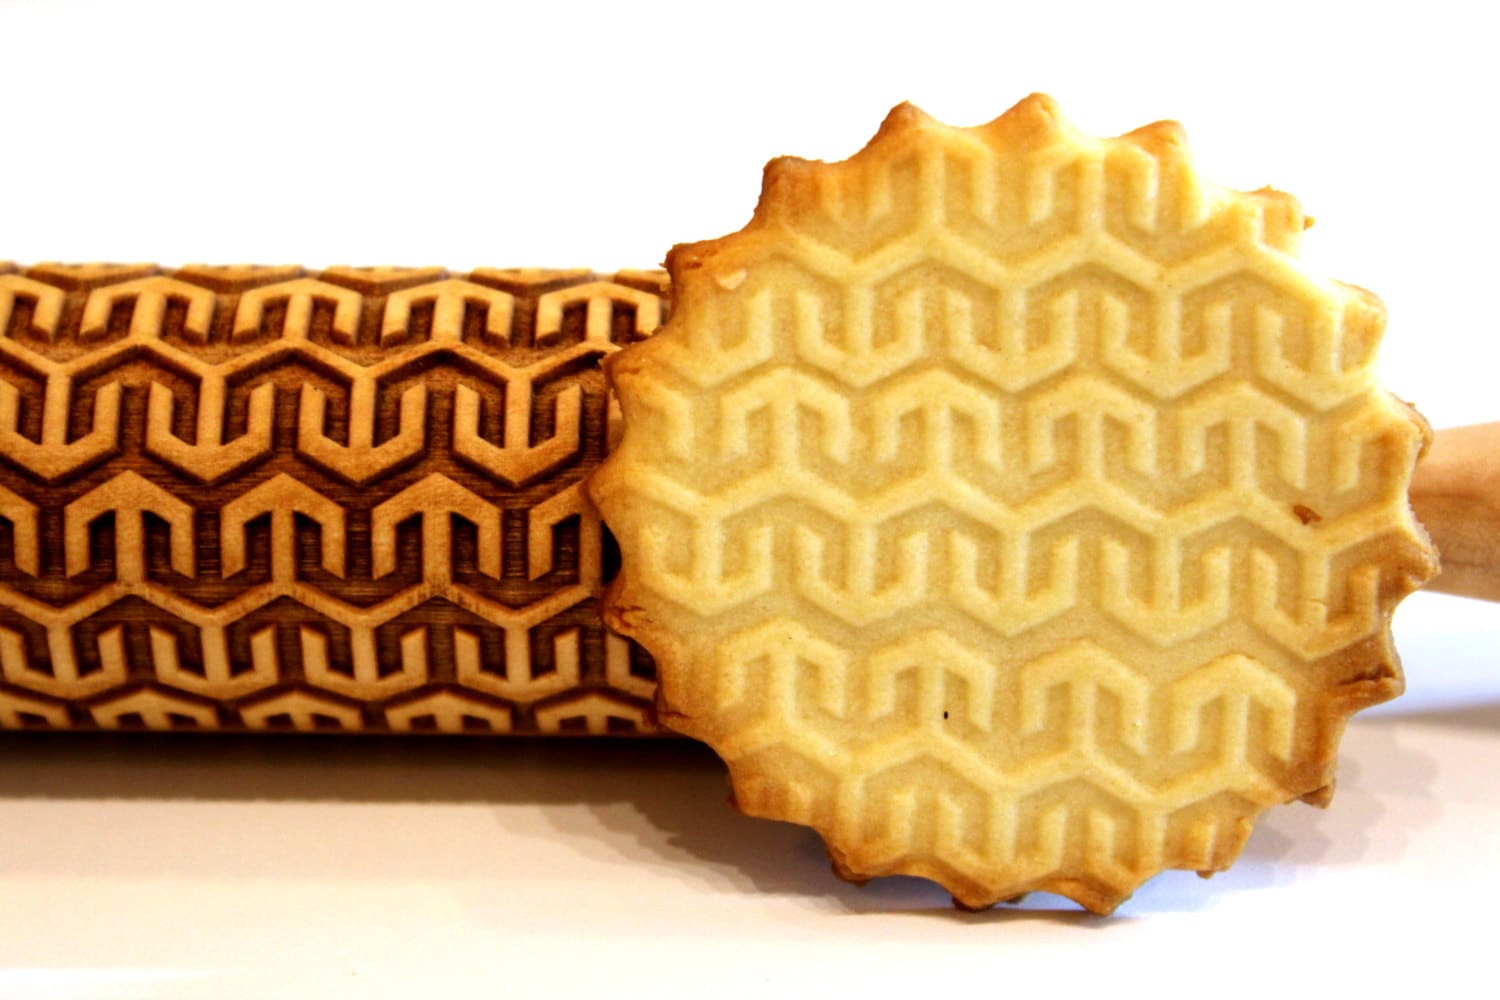 Majolica Tiles Rolling Pin for Christmas Shortbread Cookies